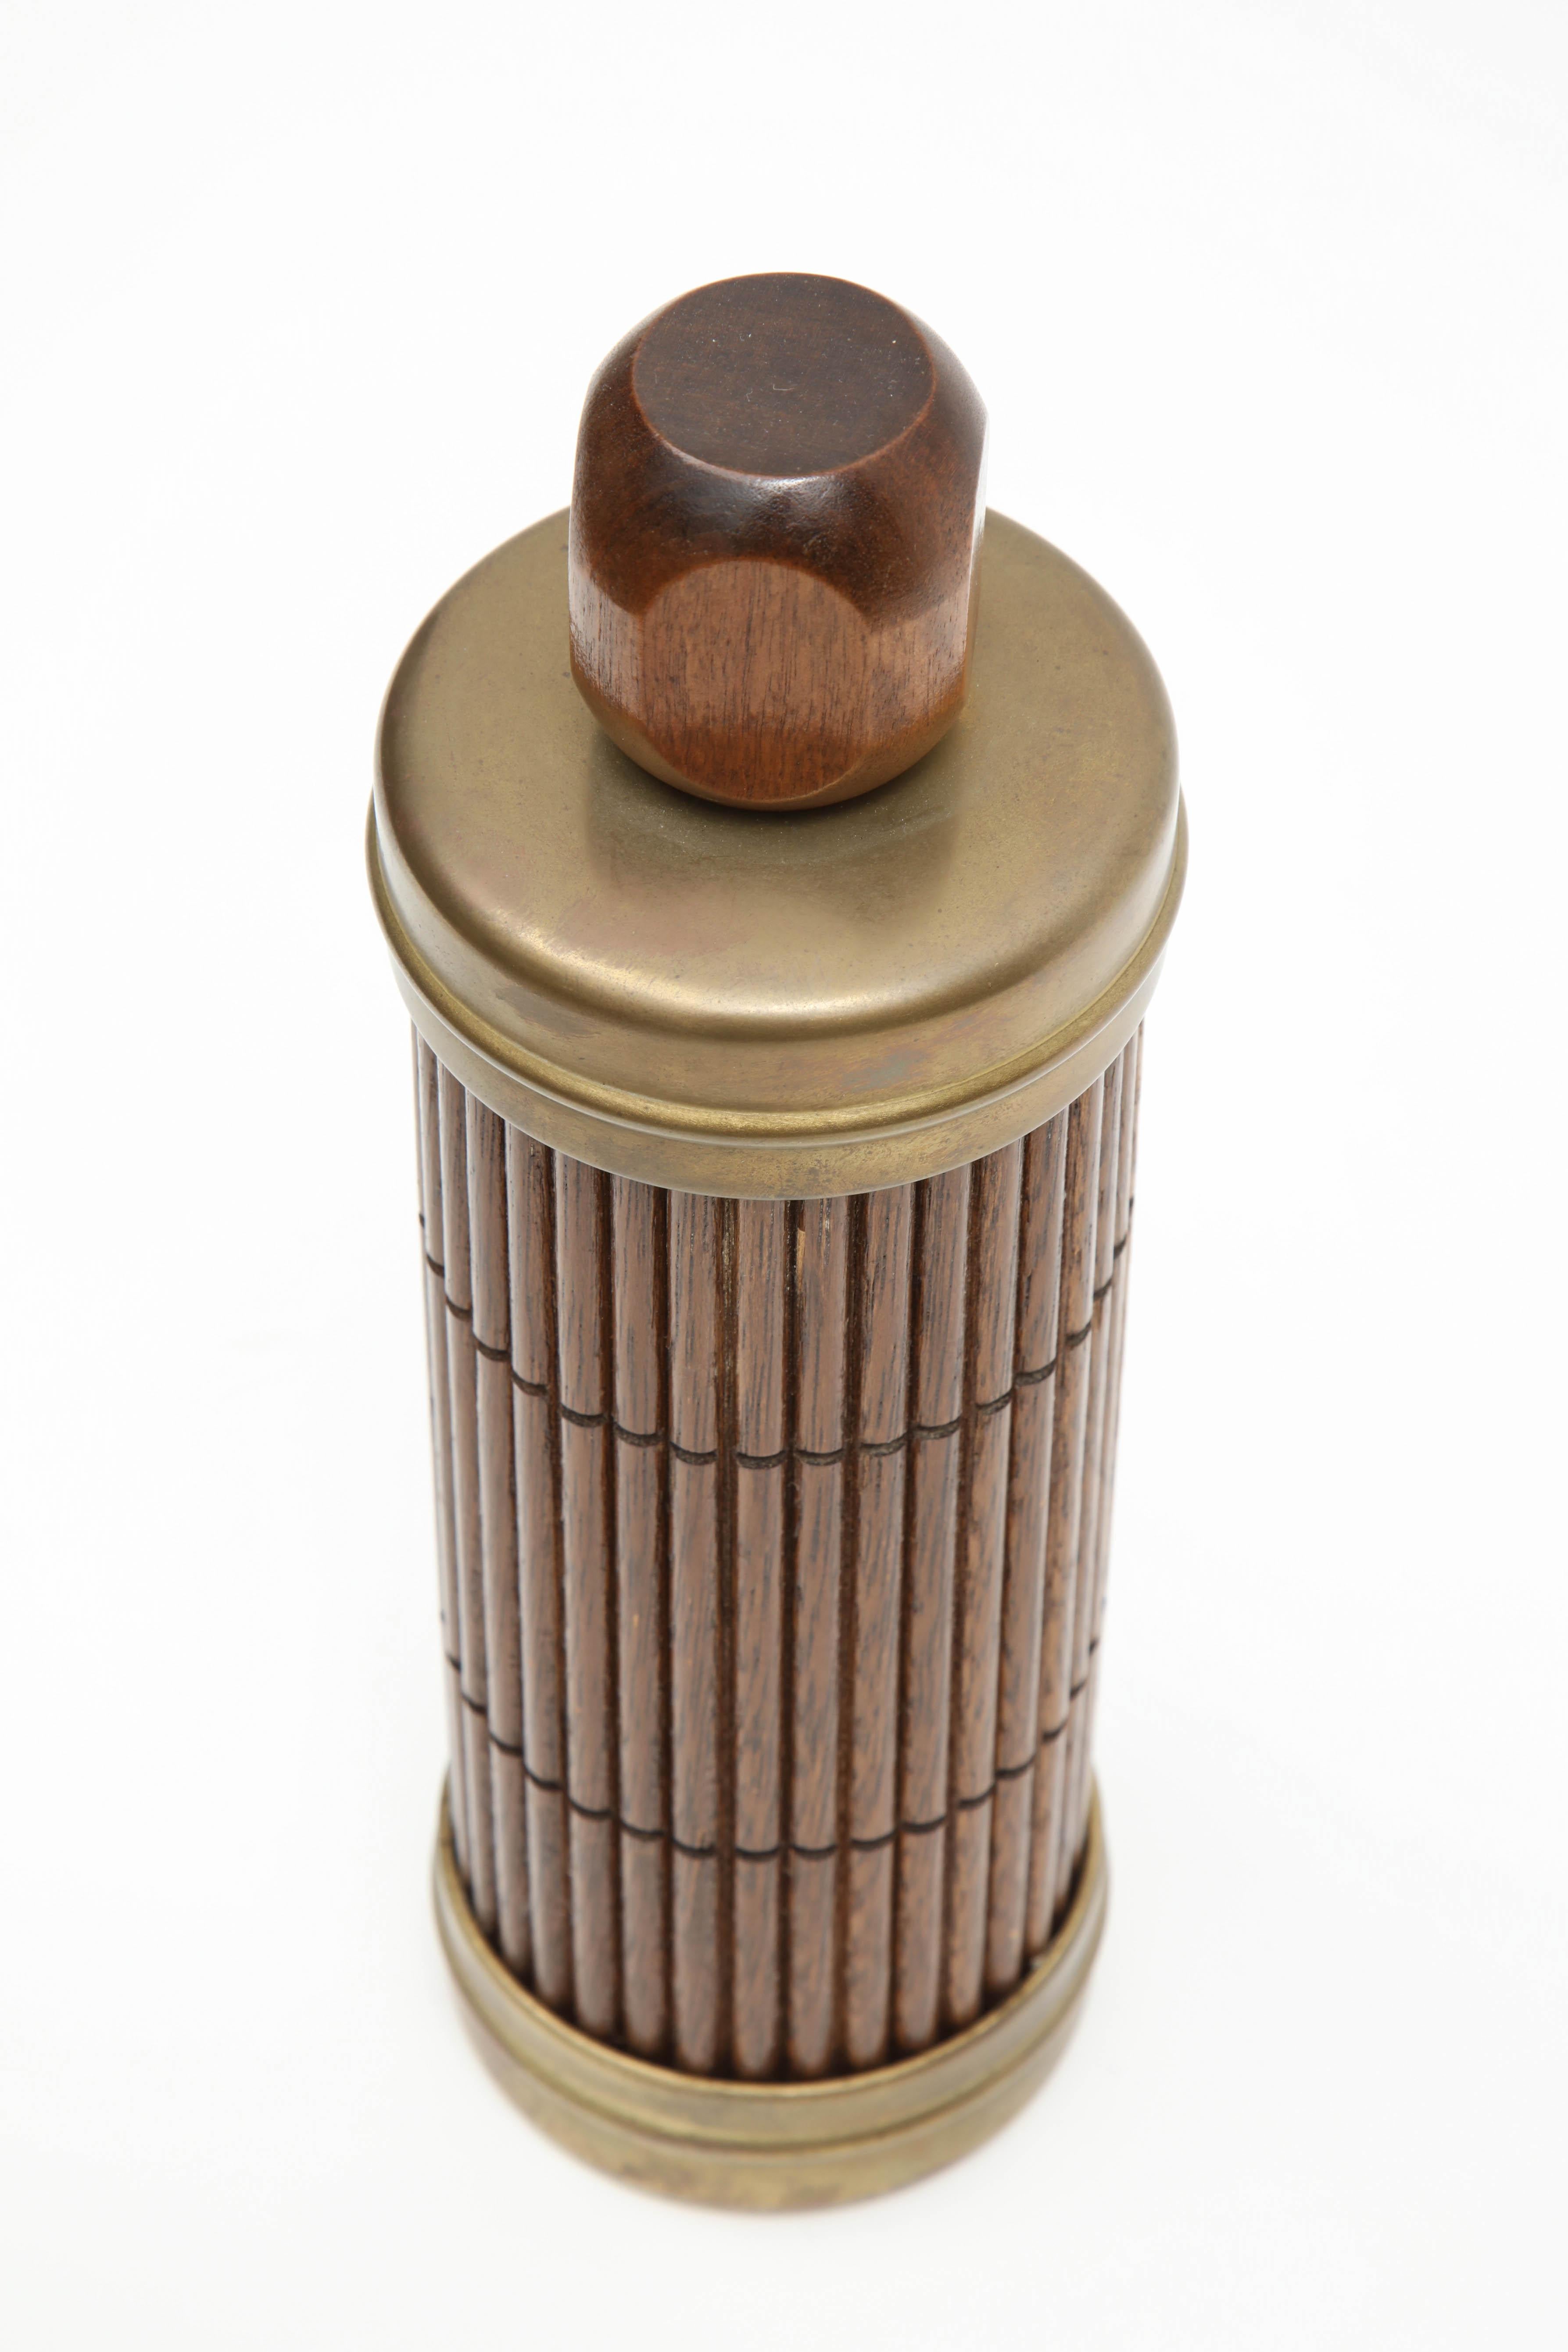 Mid-20th Century Thermo from Japan, Midcentury, Brown Bamboo with Metal Details, C 1950, Japan For Sale